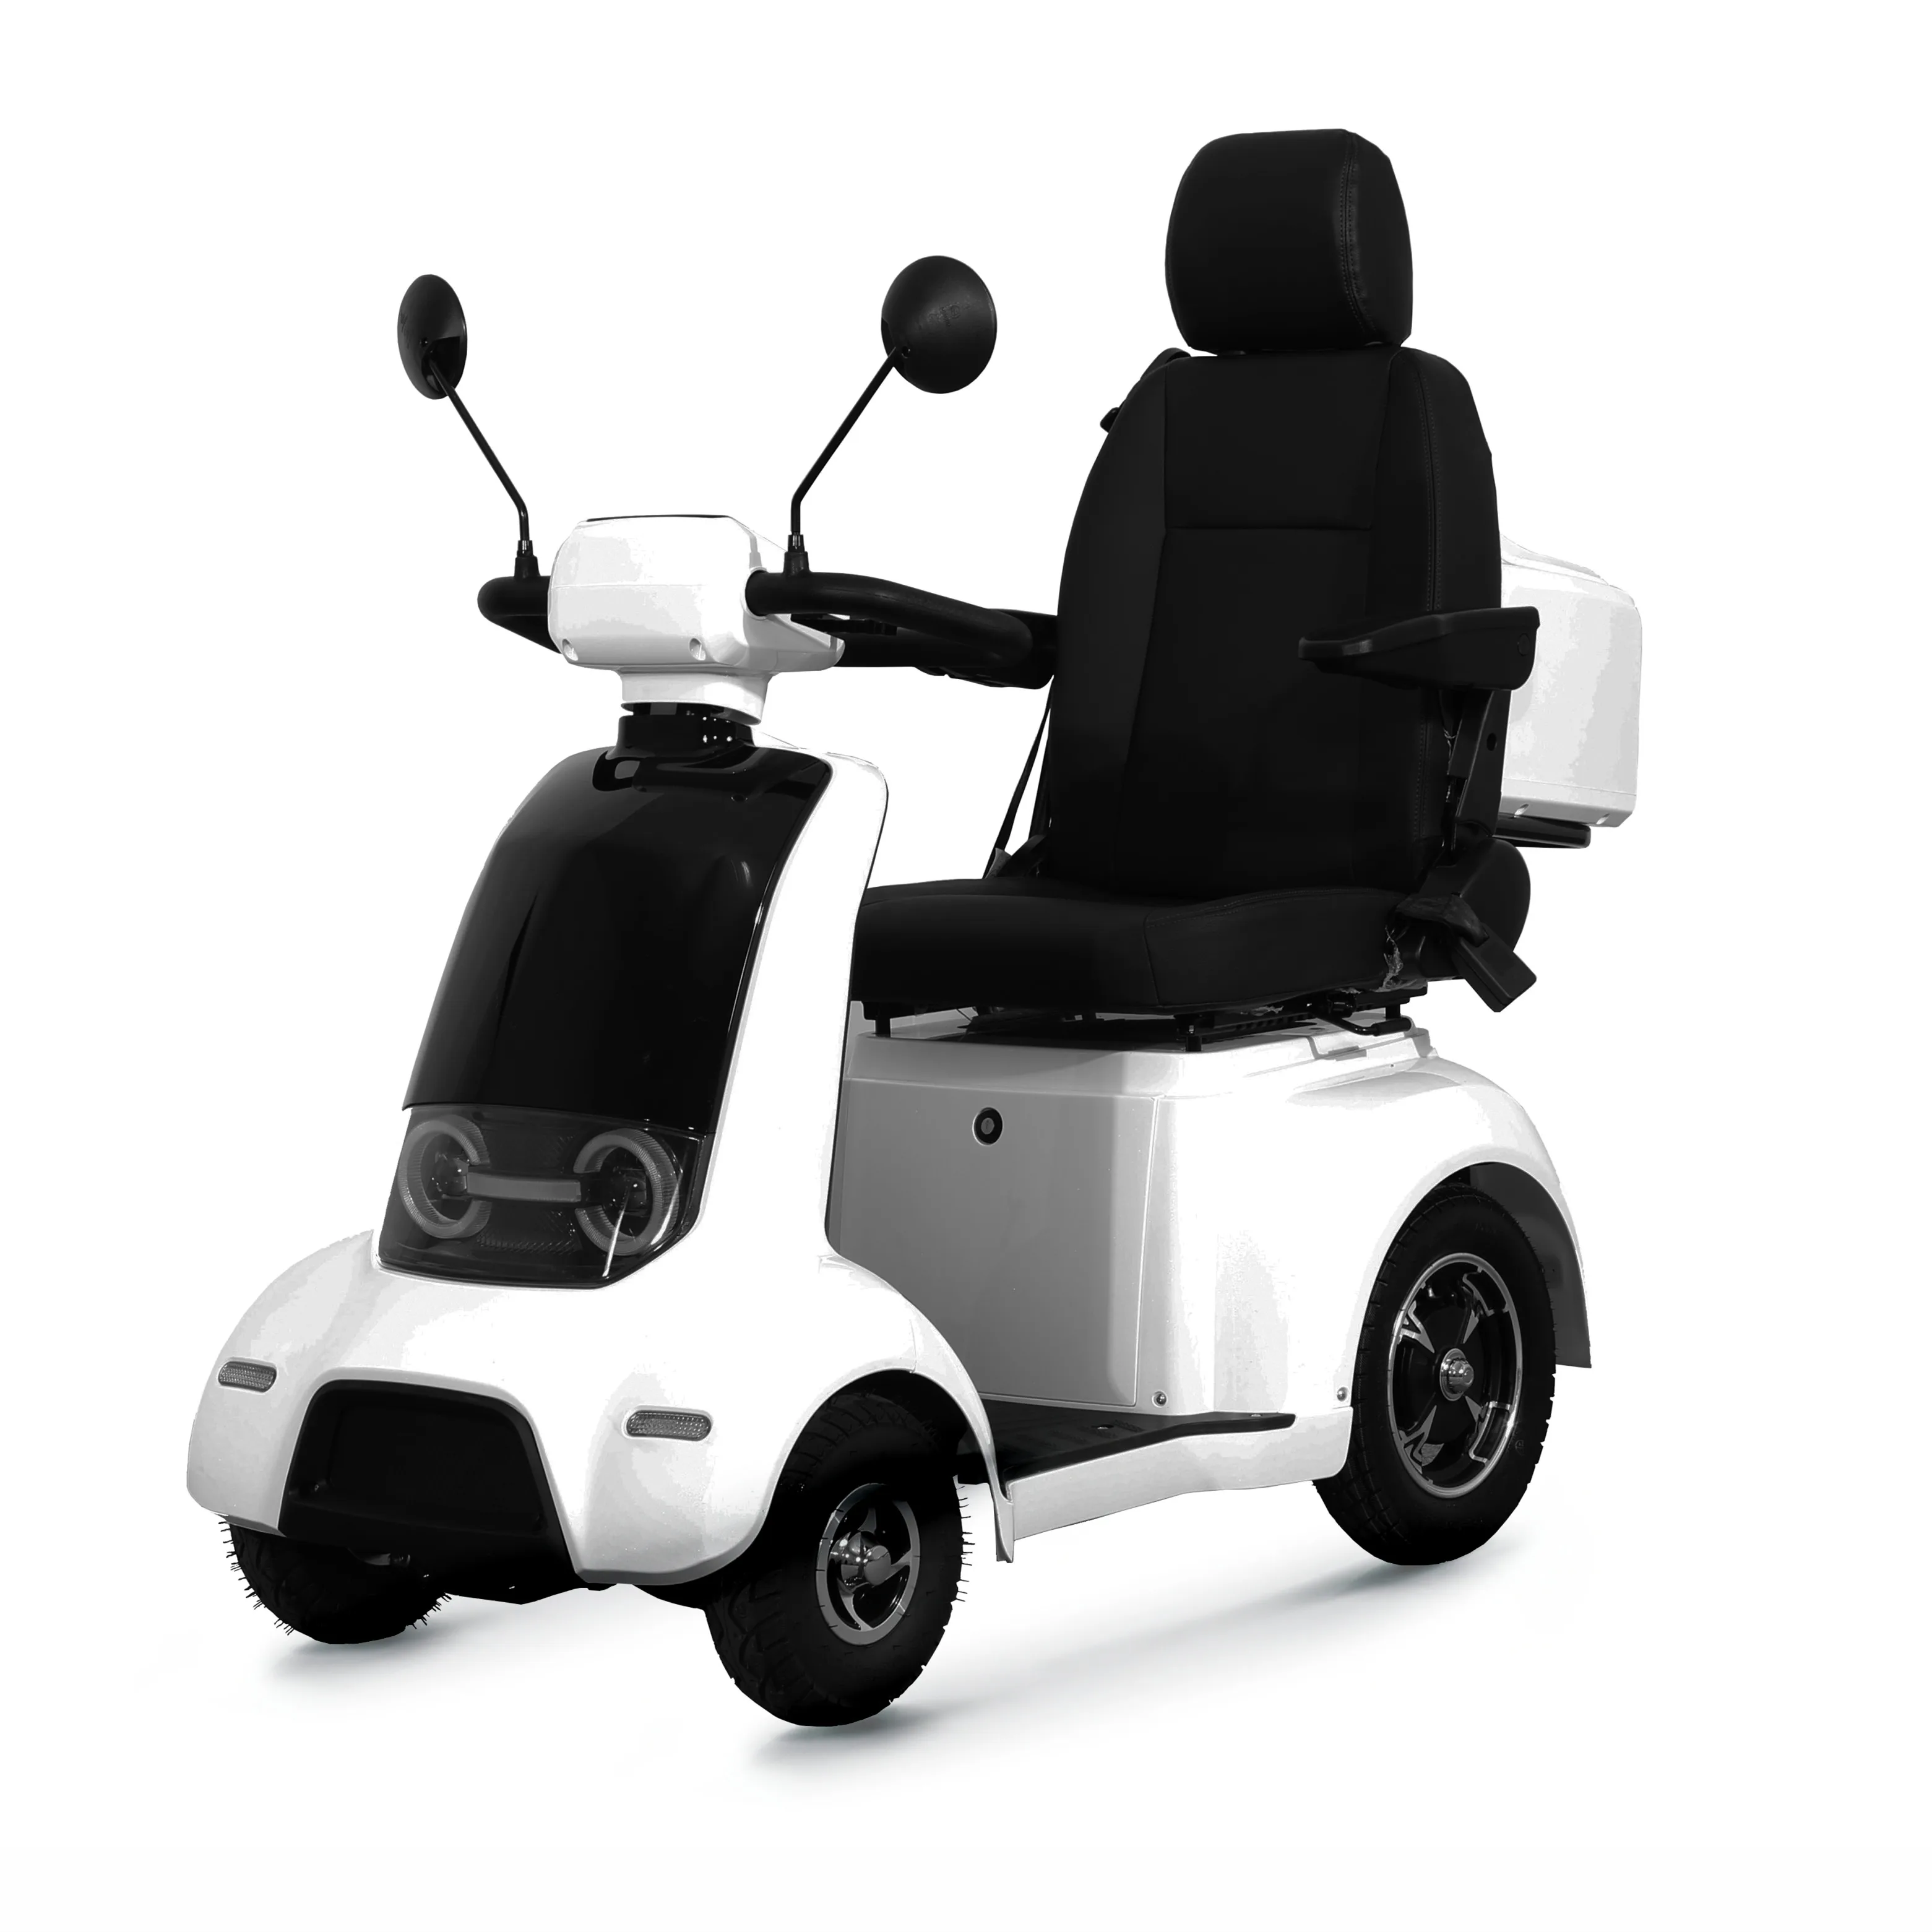 

Travel 4 Wheels Elderly Electric Scooter Disabled Handicapped Unfolding Mobility Scooter For Seniors